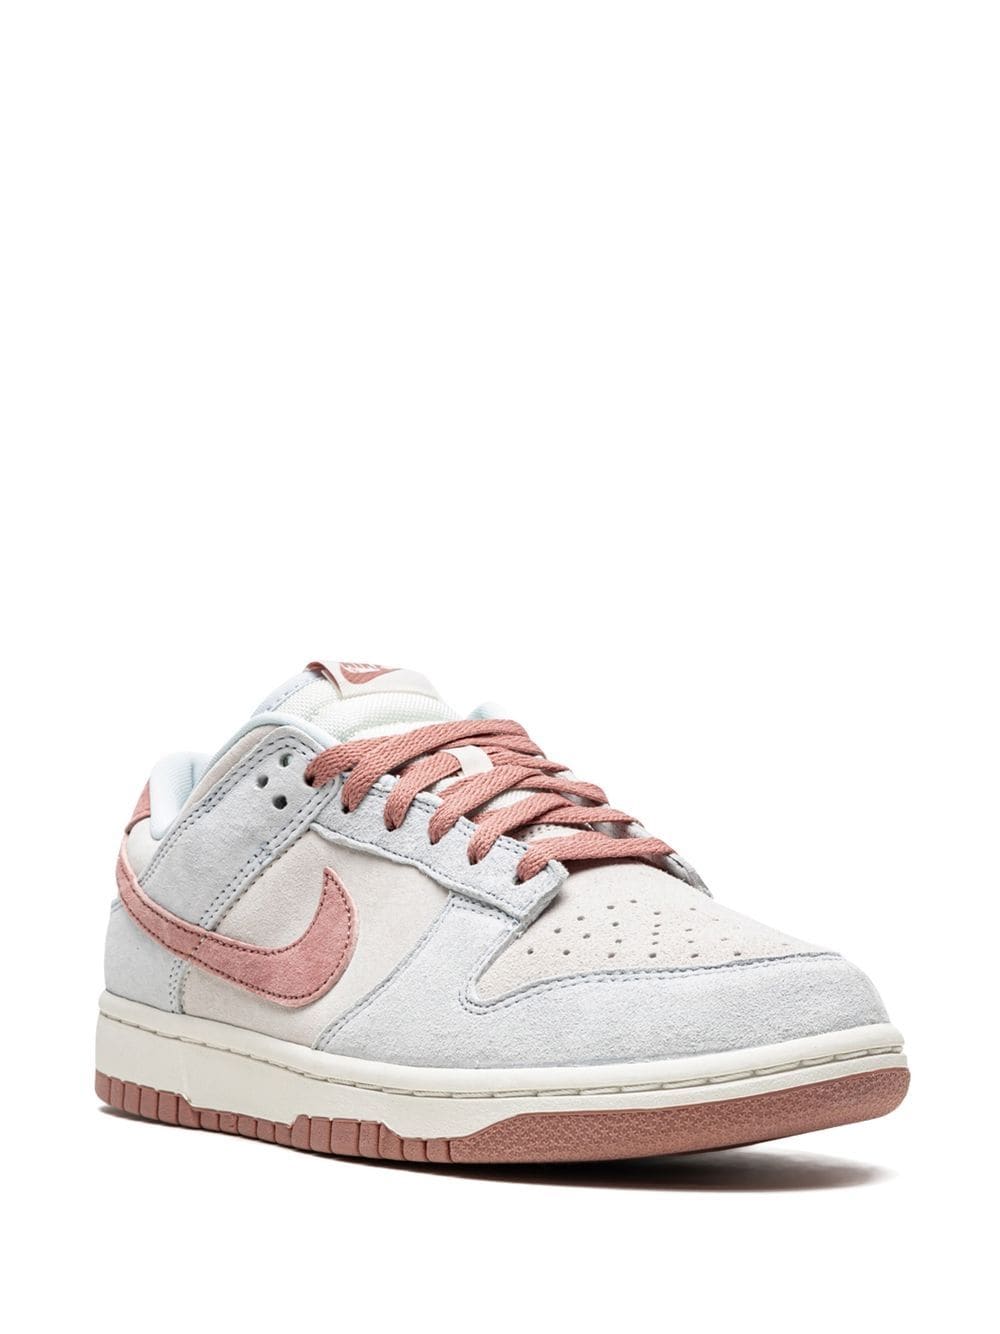 NIKE dunk low fossil rose 28.0cm